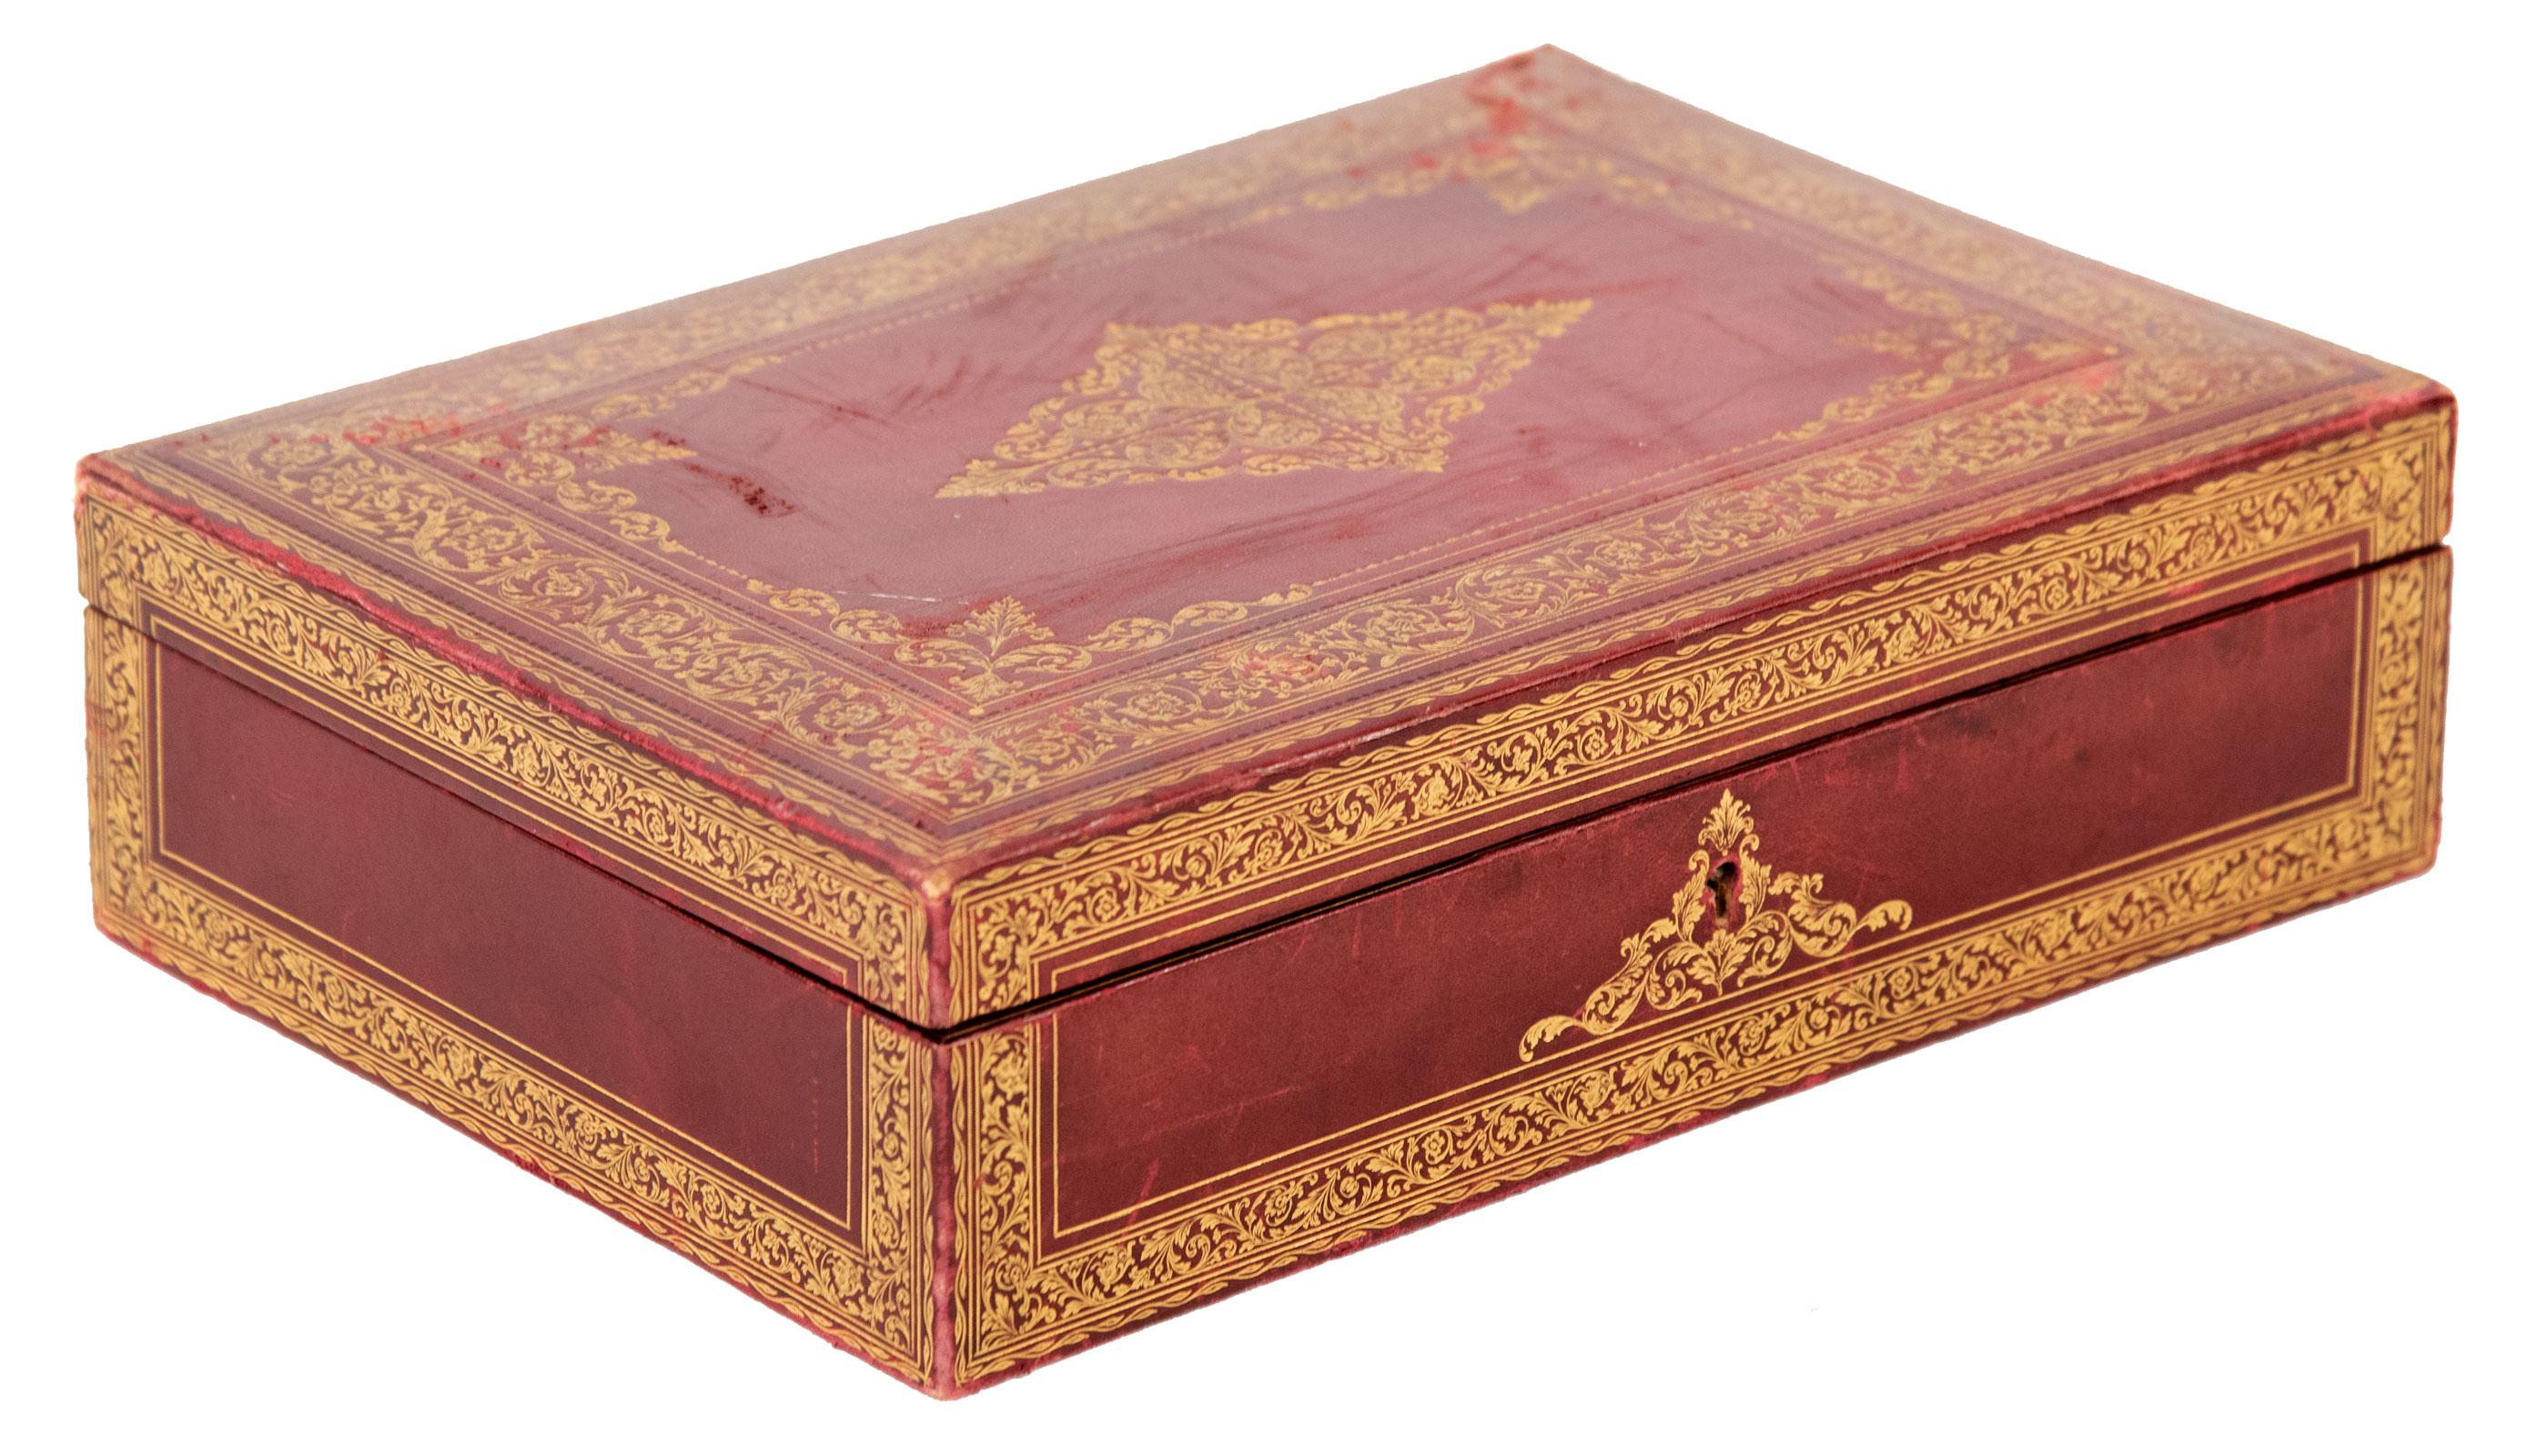 19th century Italian stamped and gilt red leather box with Suede interior.